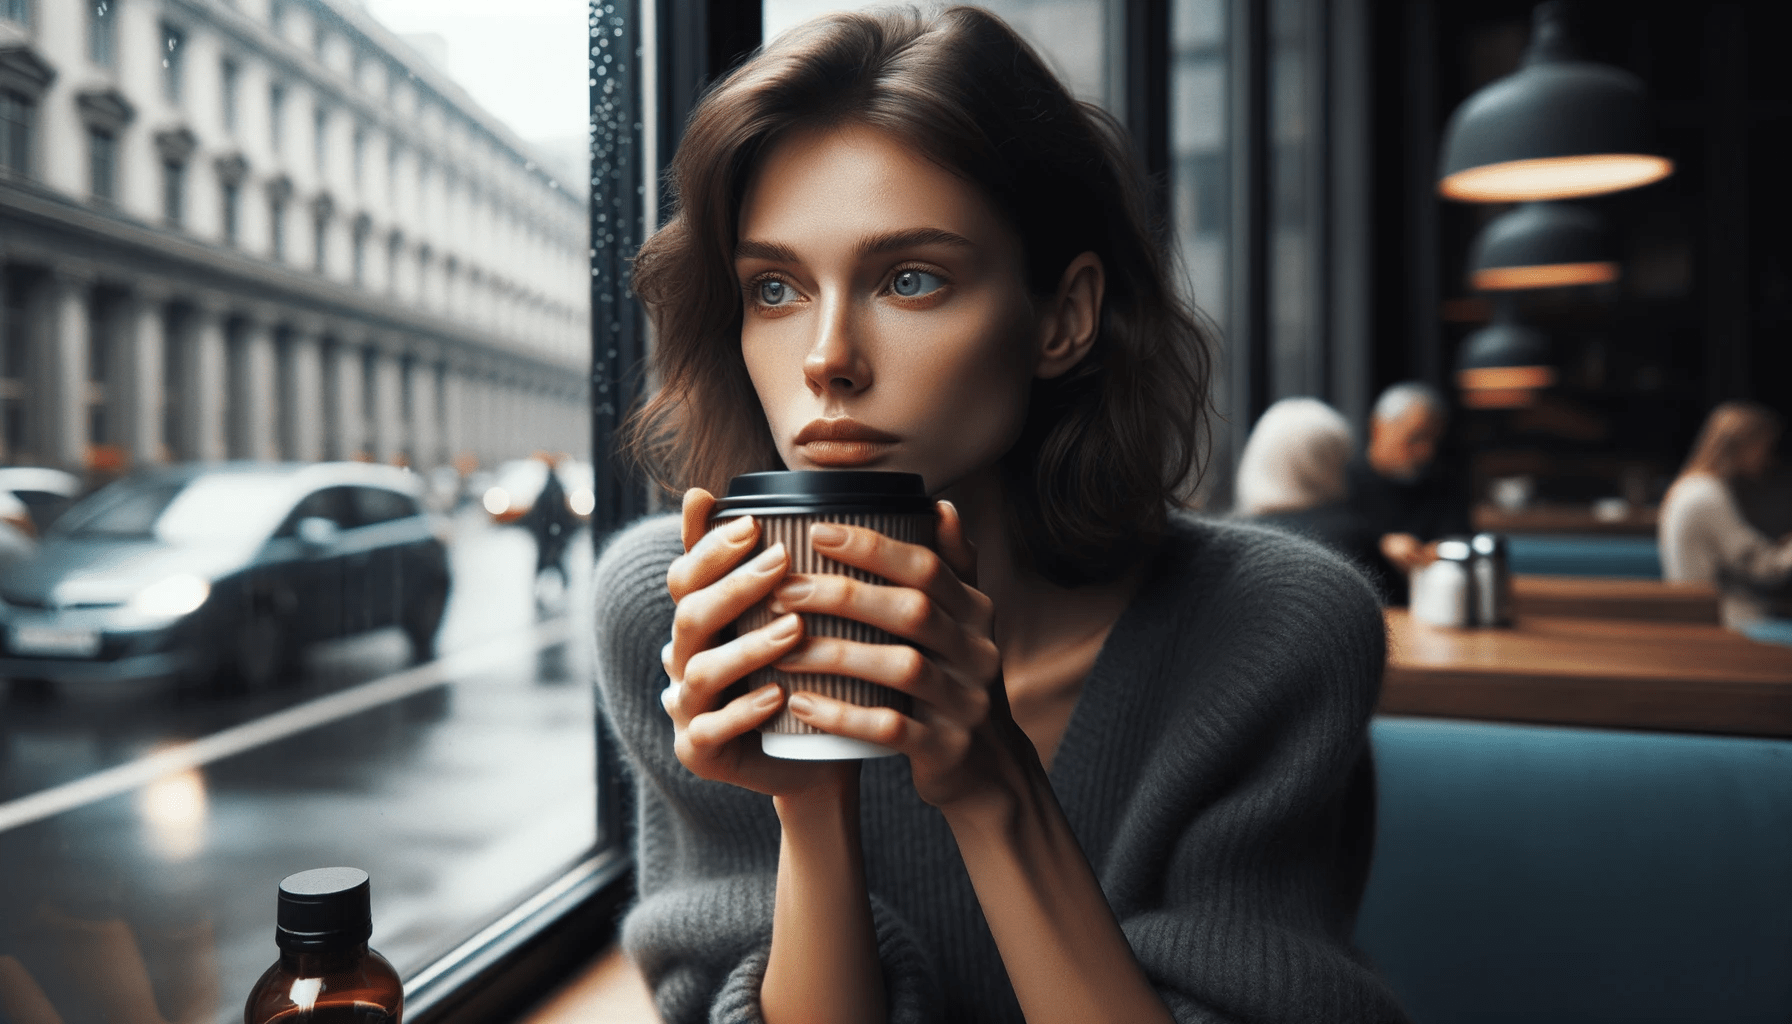 woman of European descent in an urban cafe her hands cupping a warm drink. She stares out of the window her eyes unfocused and deep in th 1